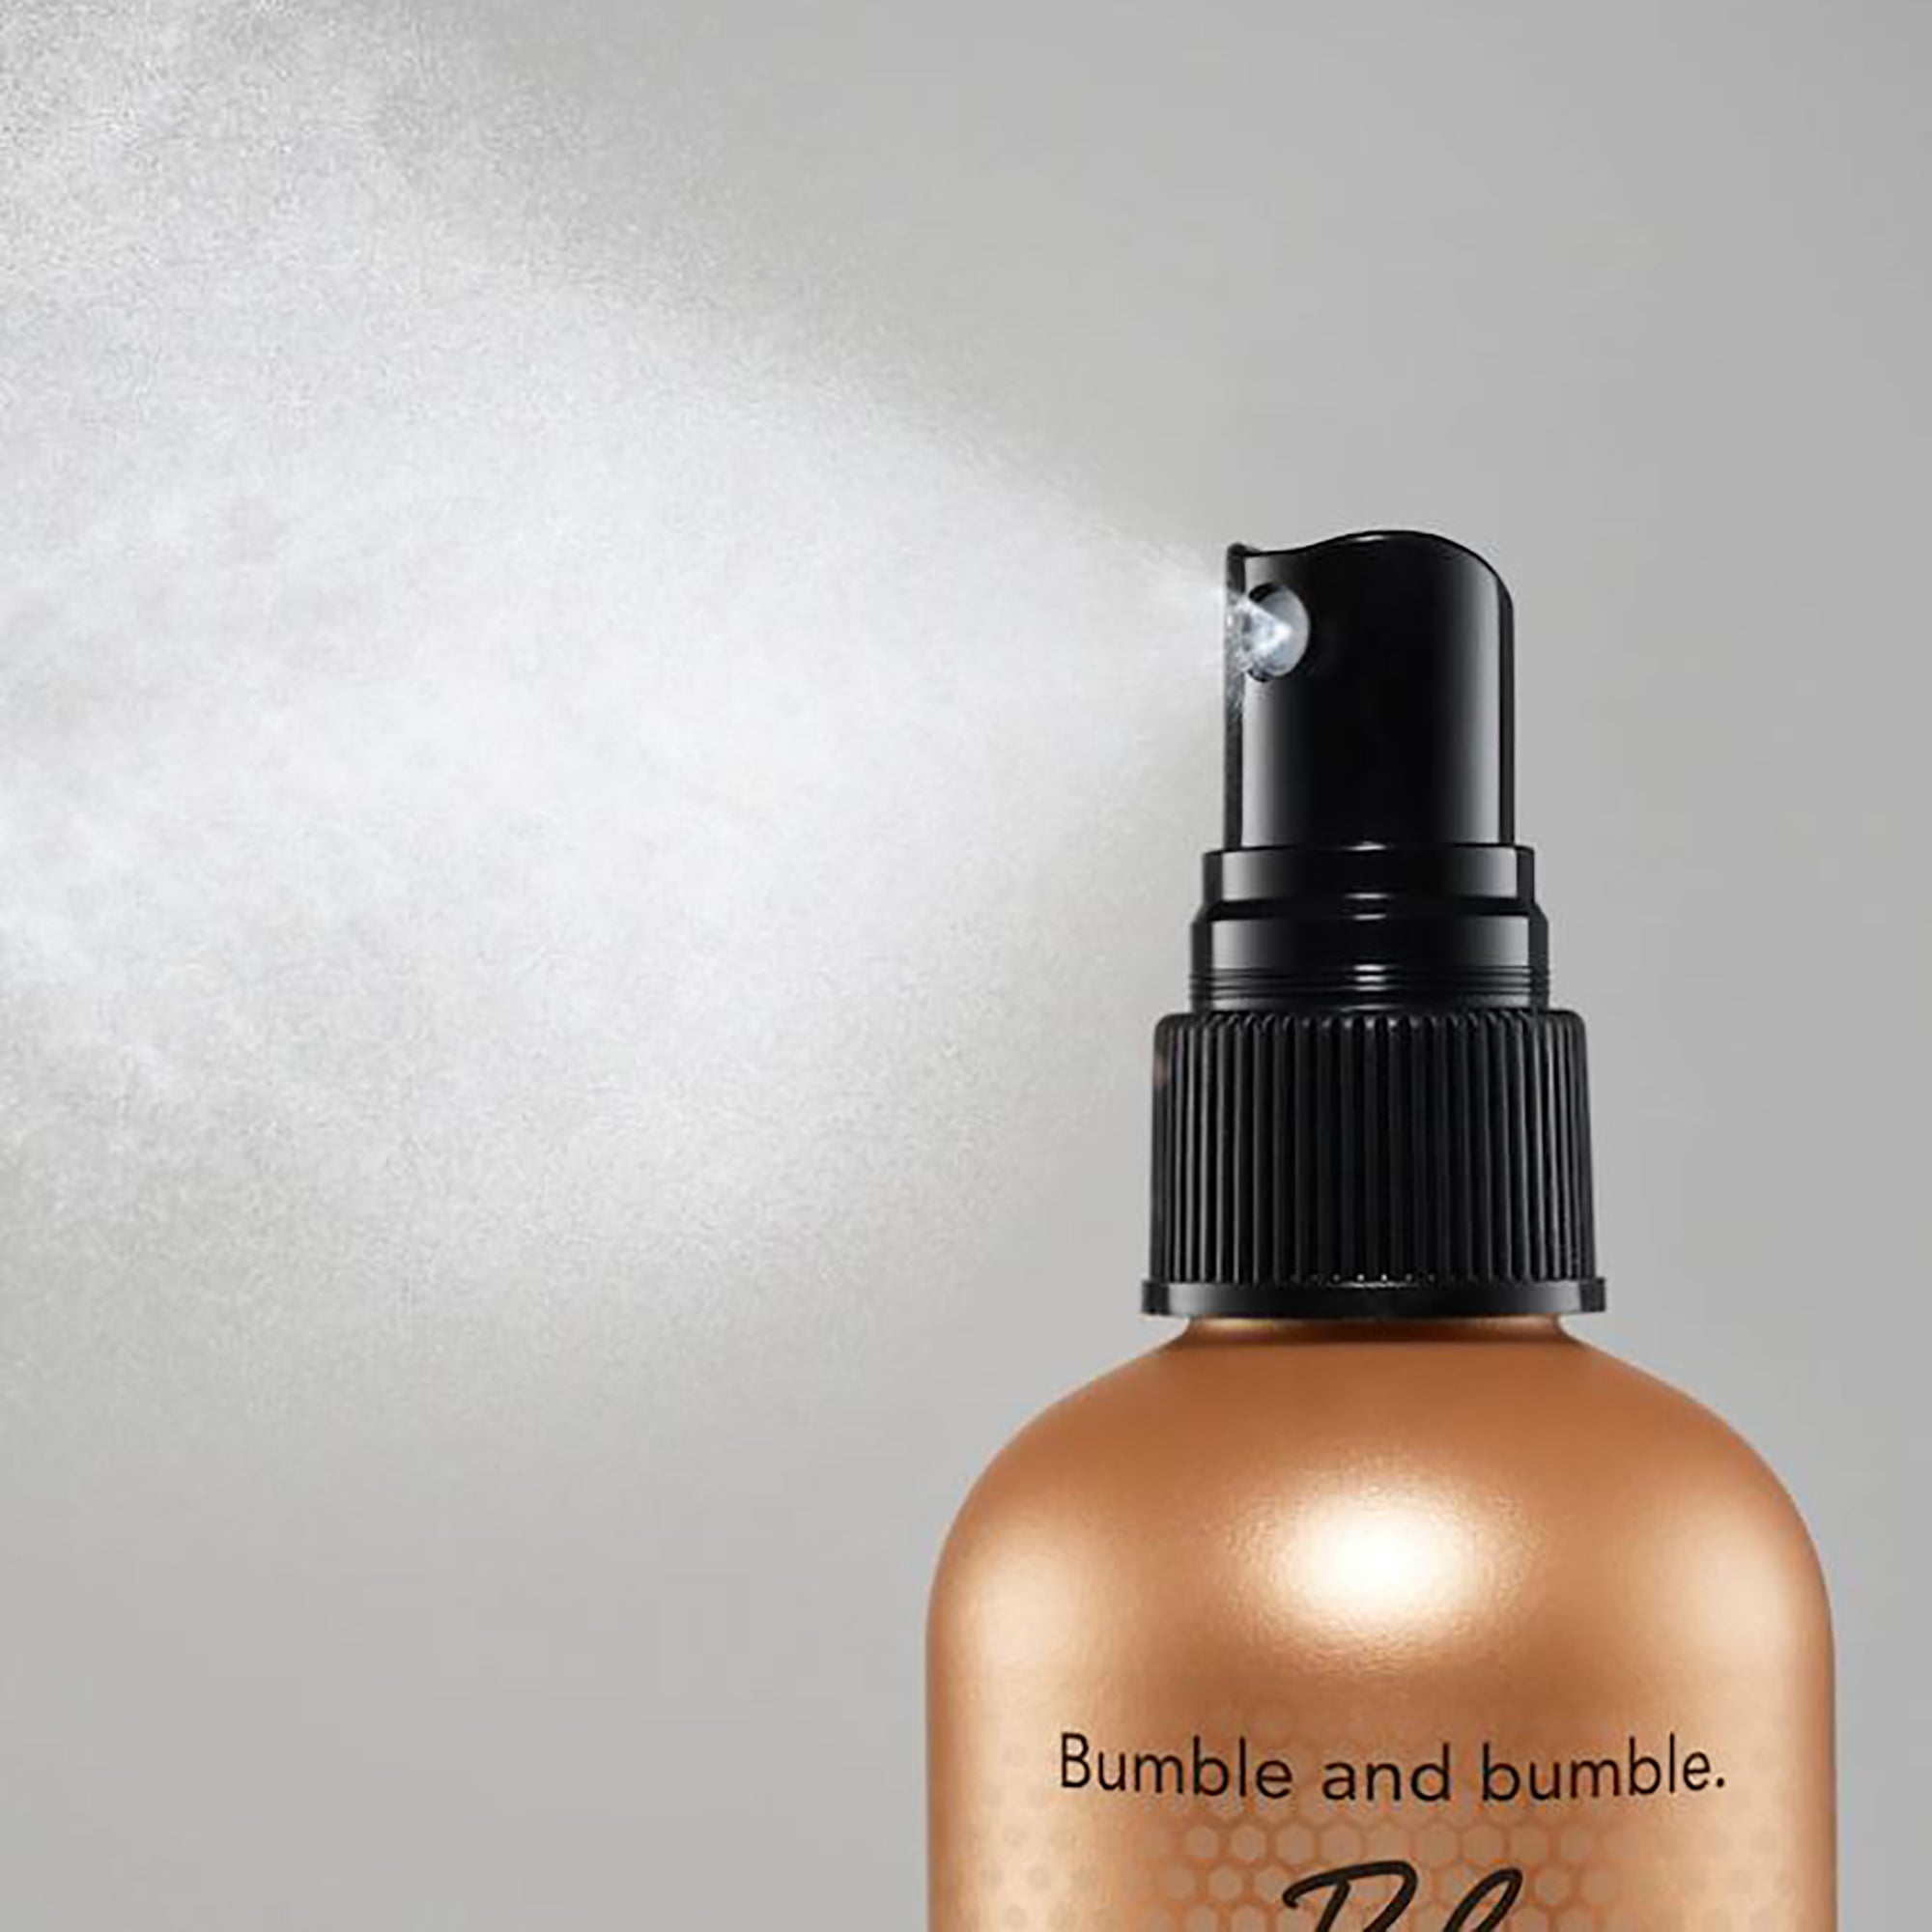 Bumble and bumble Heat Shield Thermal Protection Mist / 4.2 oz